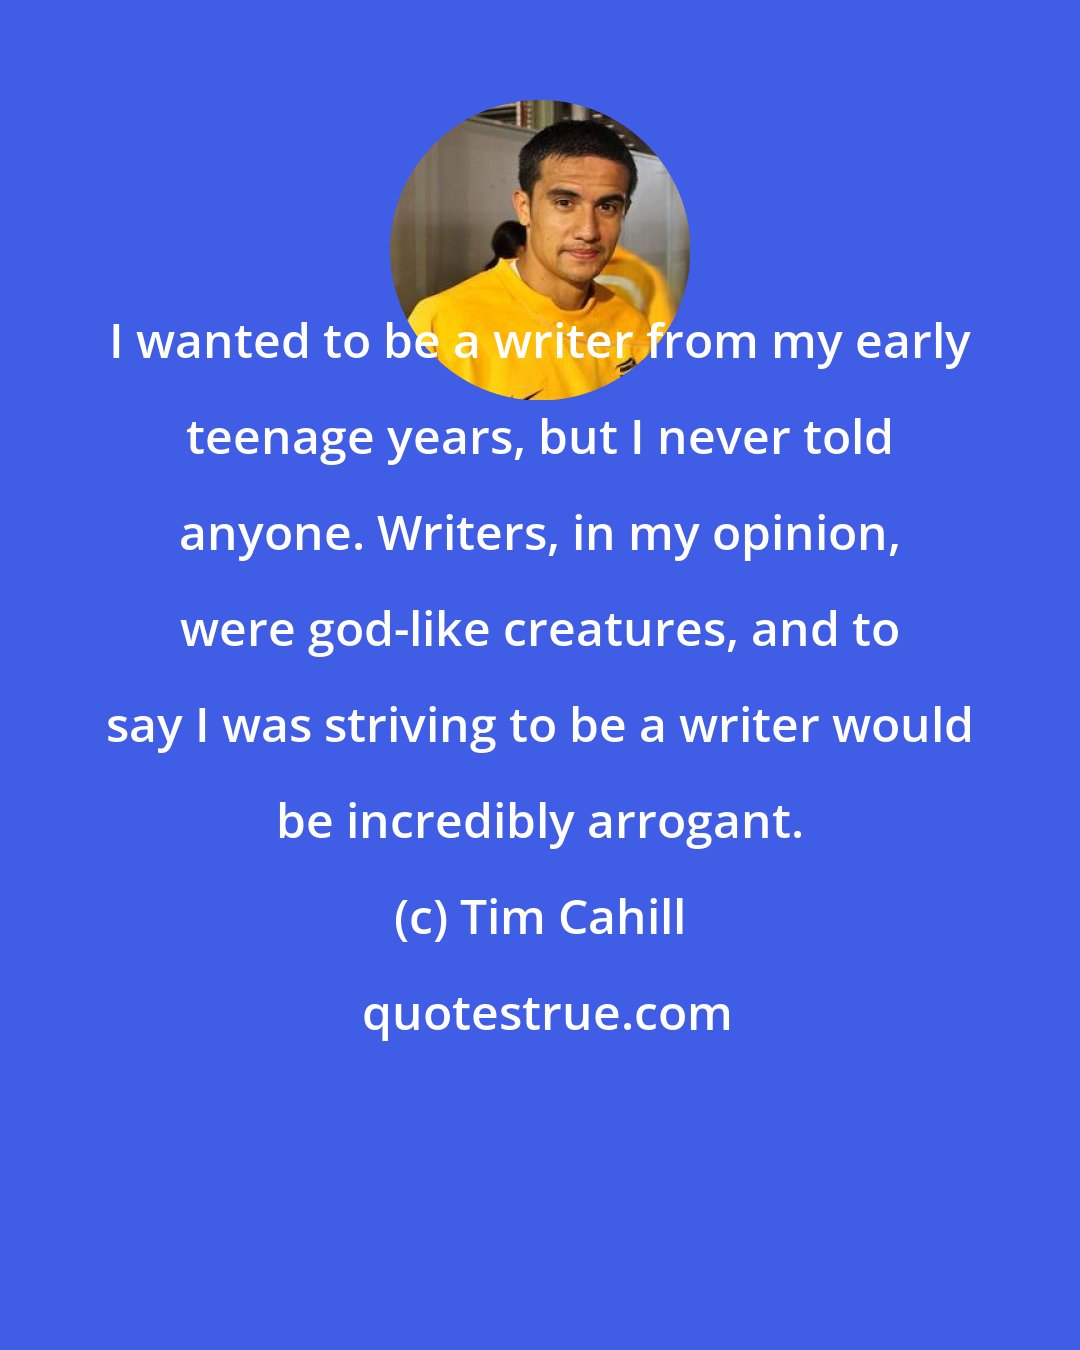 Tim Cahill: I wanted to be a writer from my early teenage years, but I never told anyone. Writers, in my opinion, were god-like creatures, and to say I was striving to be a writer would be incredibly arrogant.